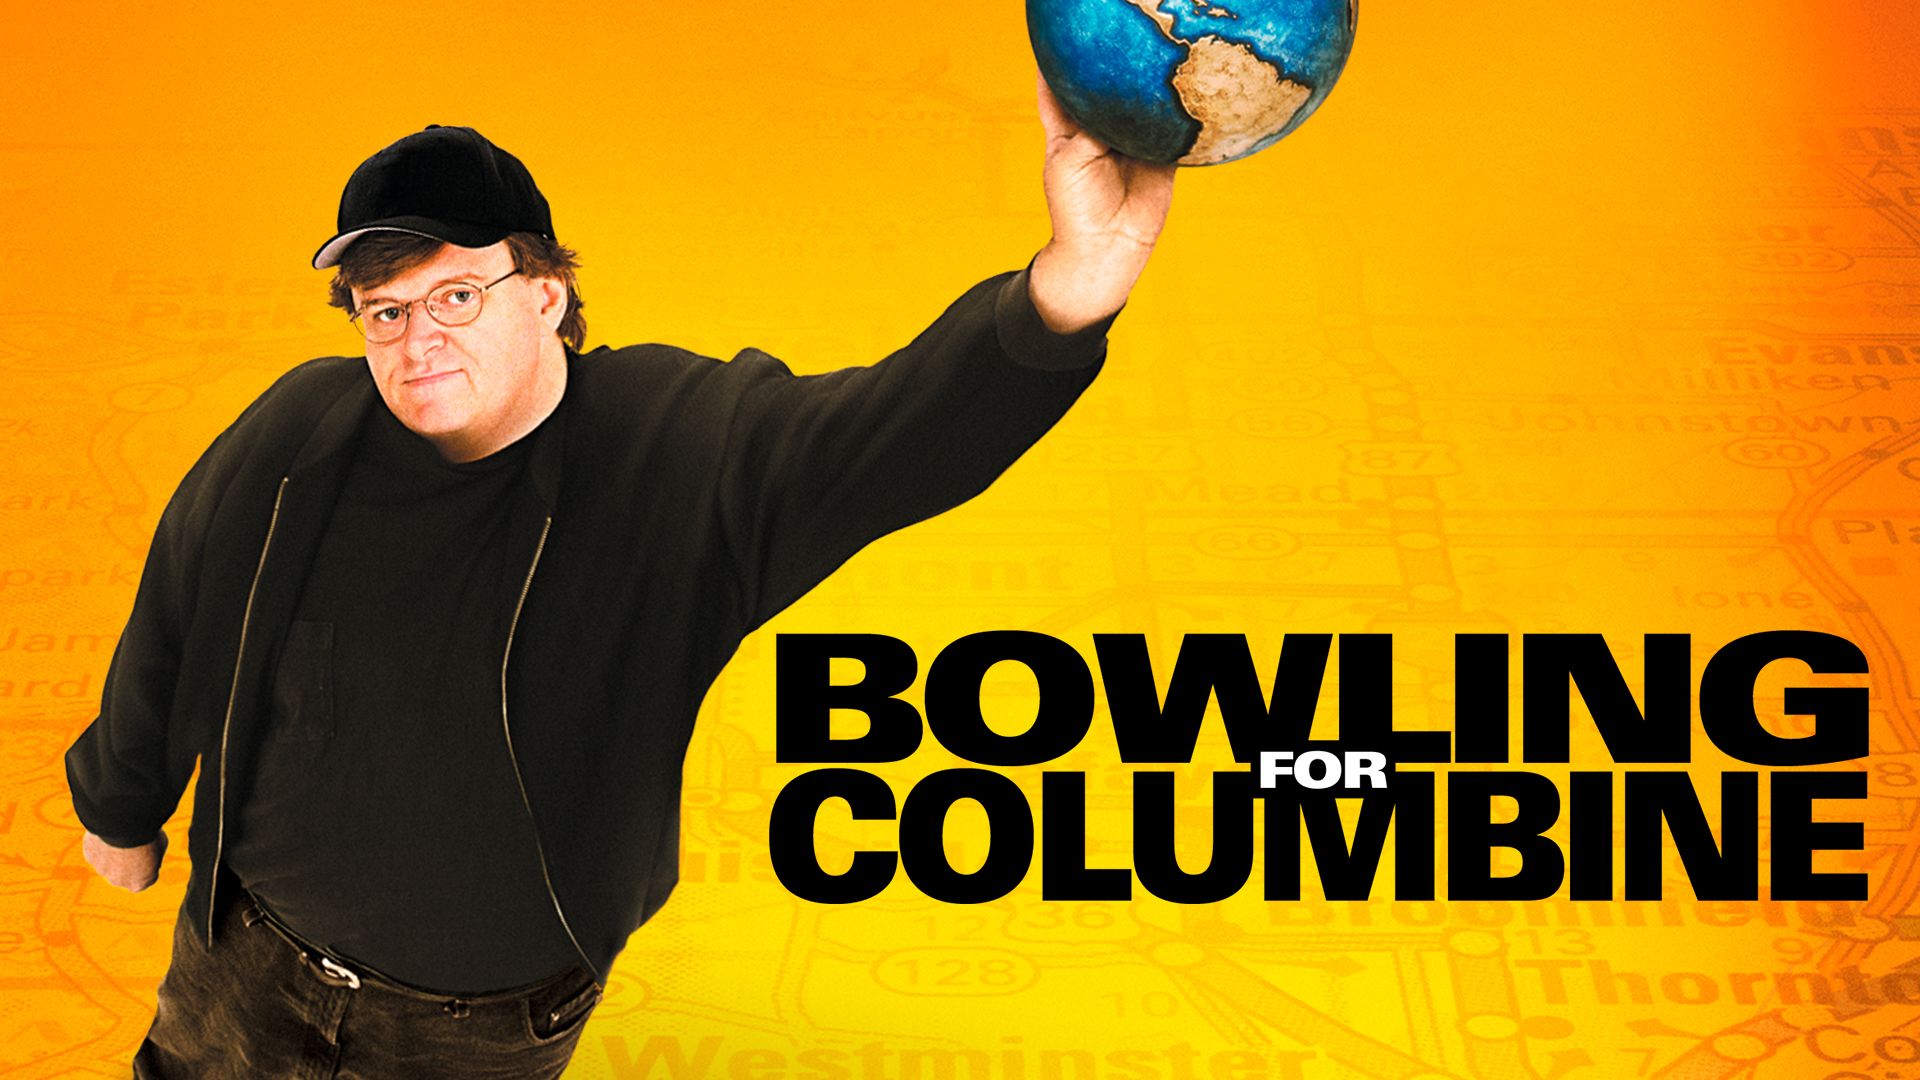 41-facts-about-the-movie-bowling-for-columbine